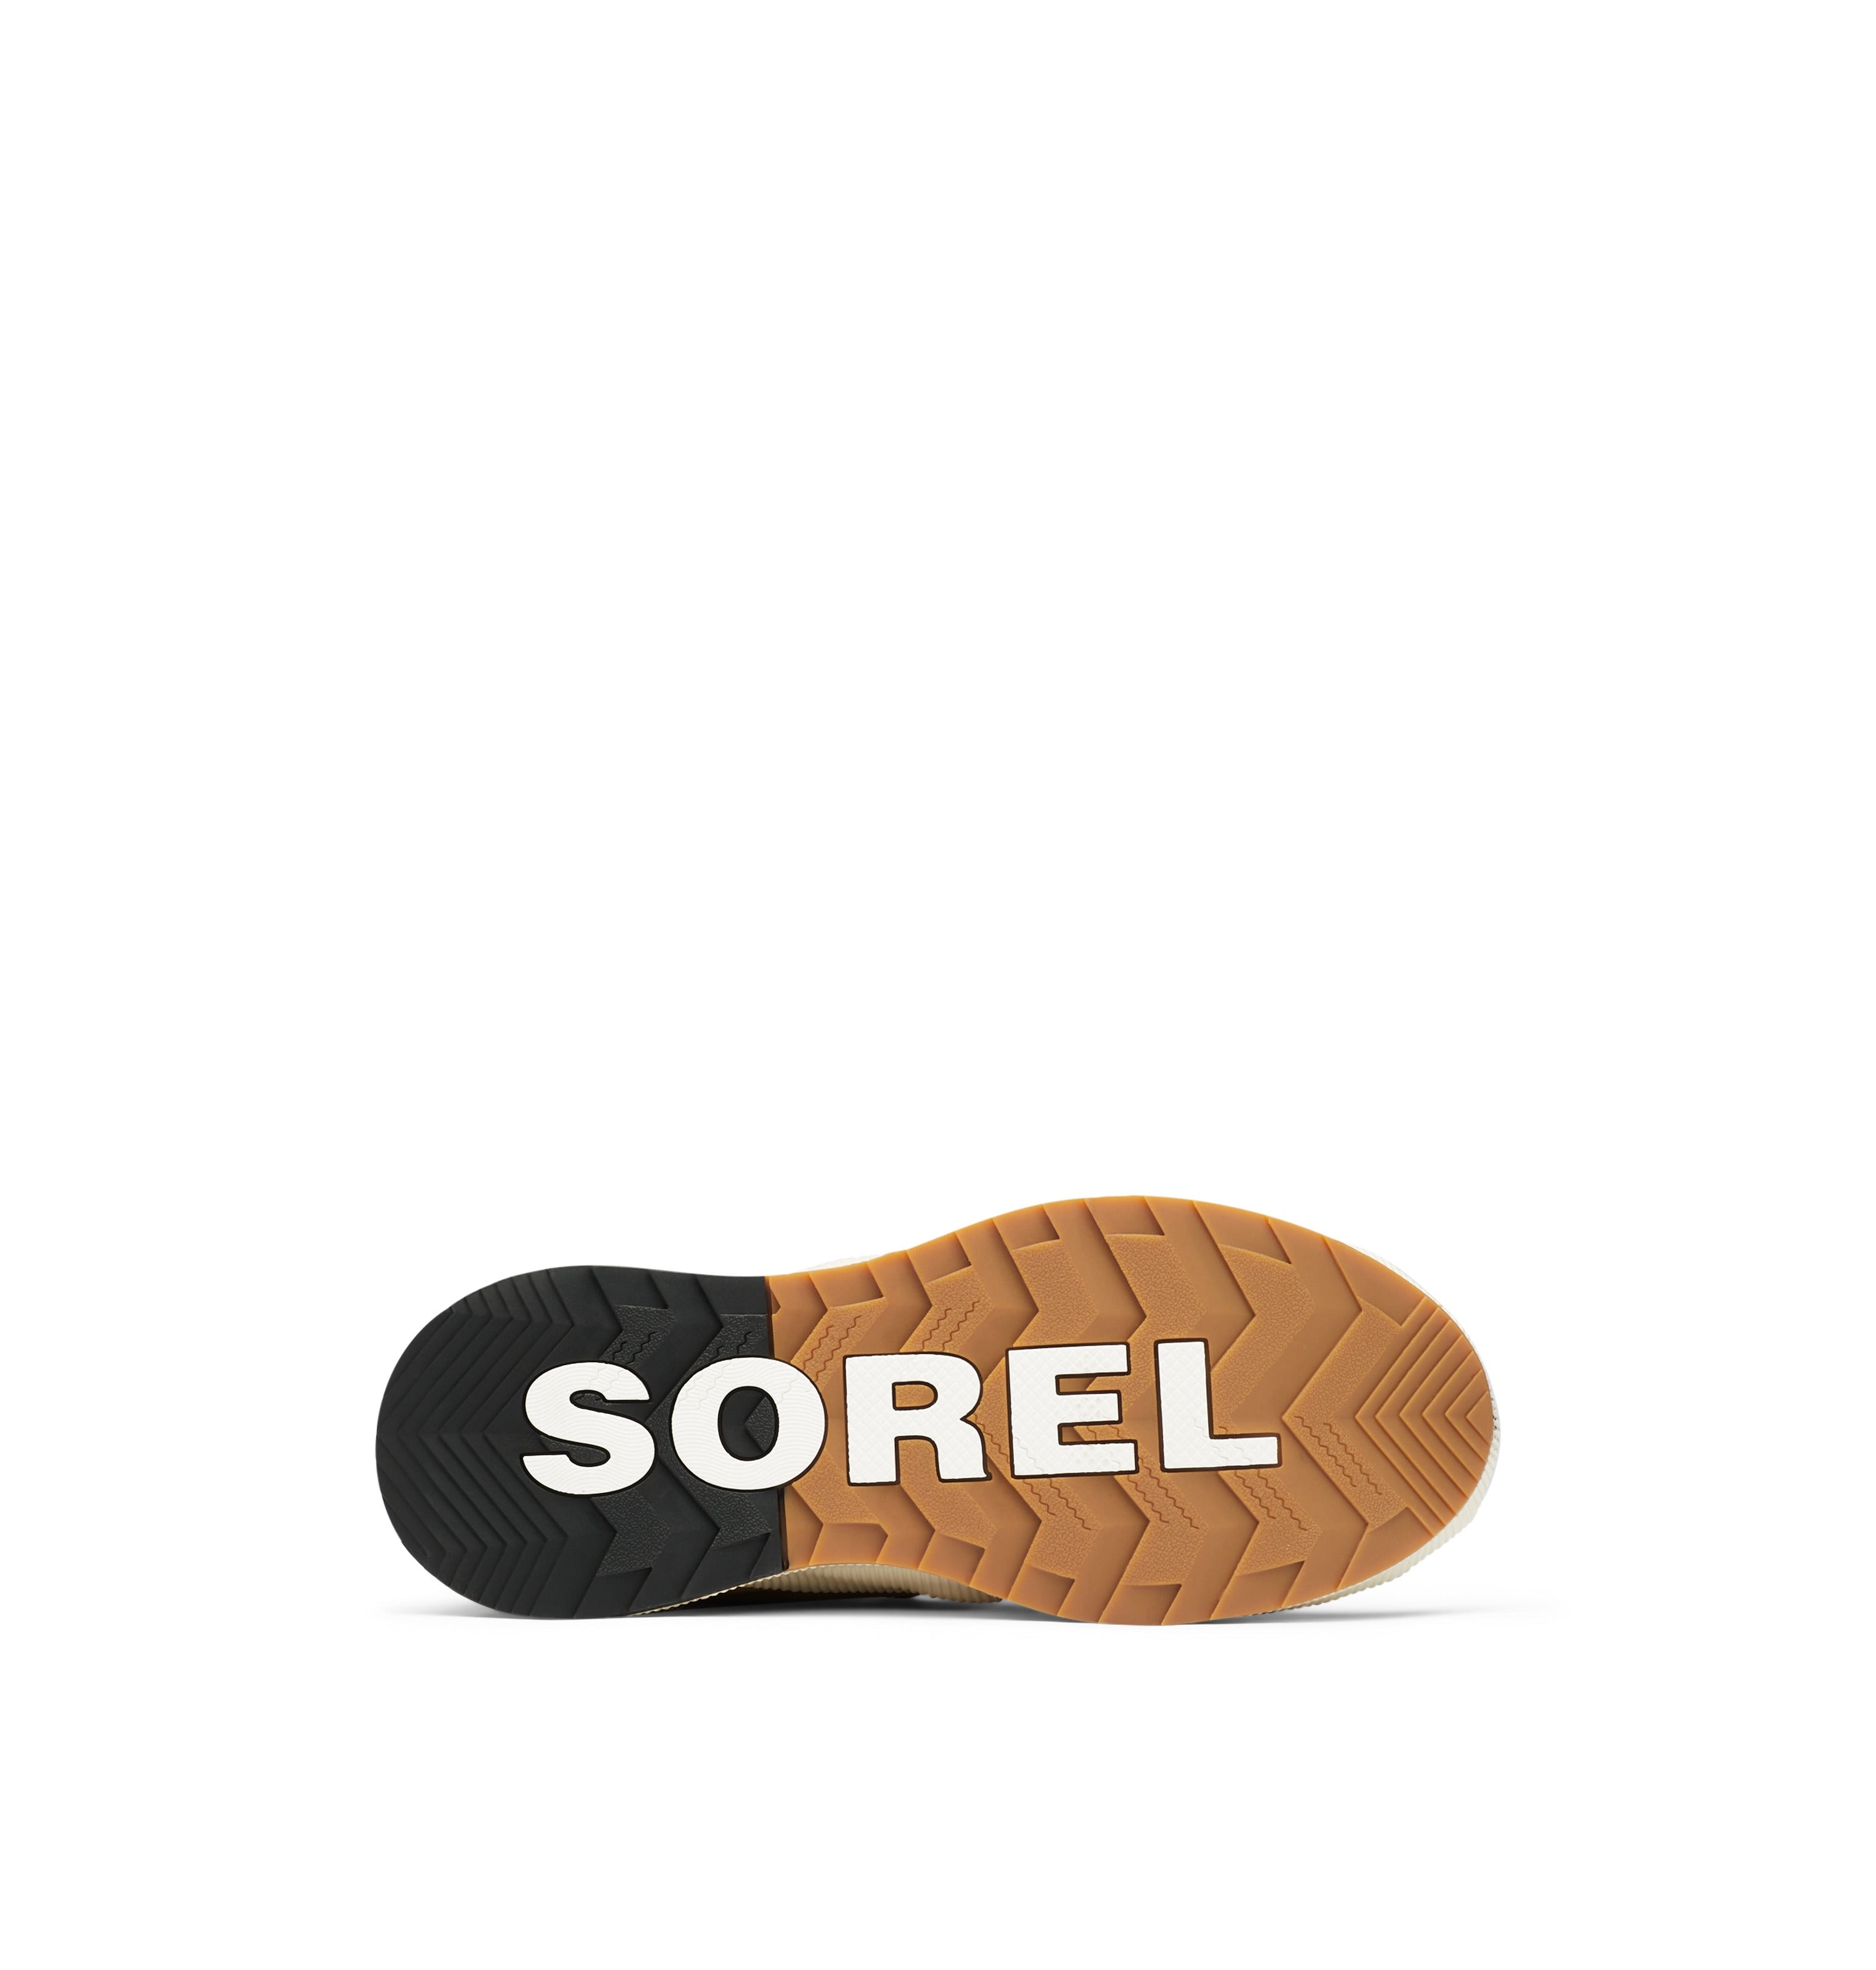 Sorel Out 'N About III Classic Duck Boot Women's